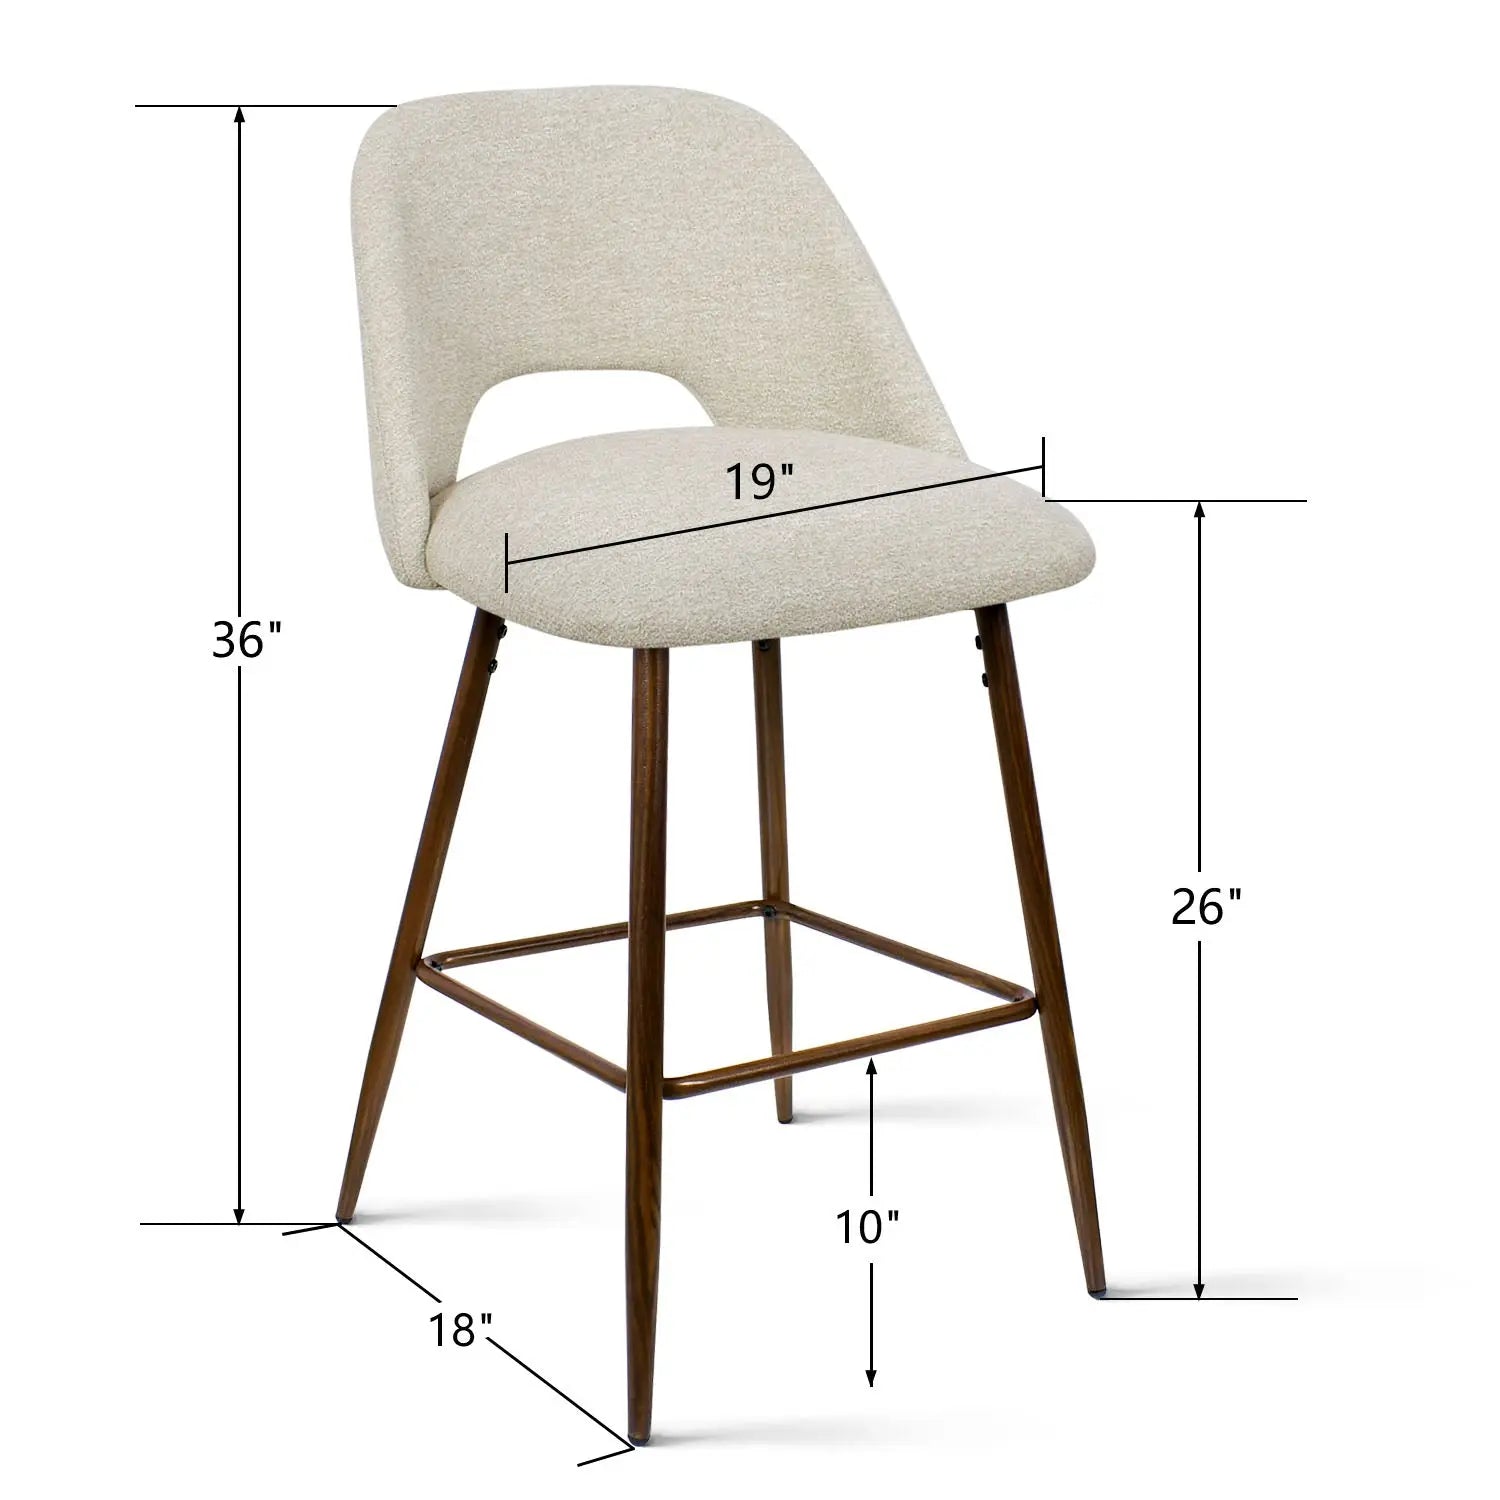 Edwin Counter Stool with Walnut Legs - Set of 2 for Stylish Seating